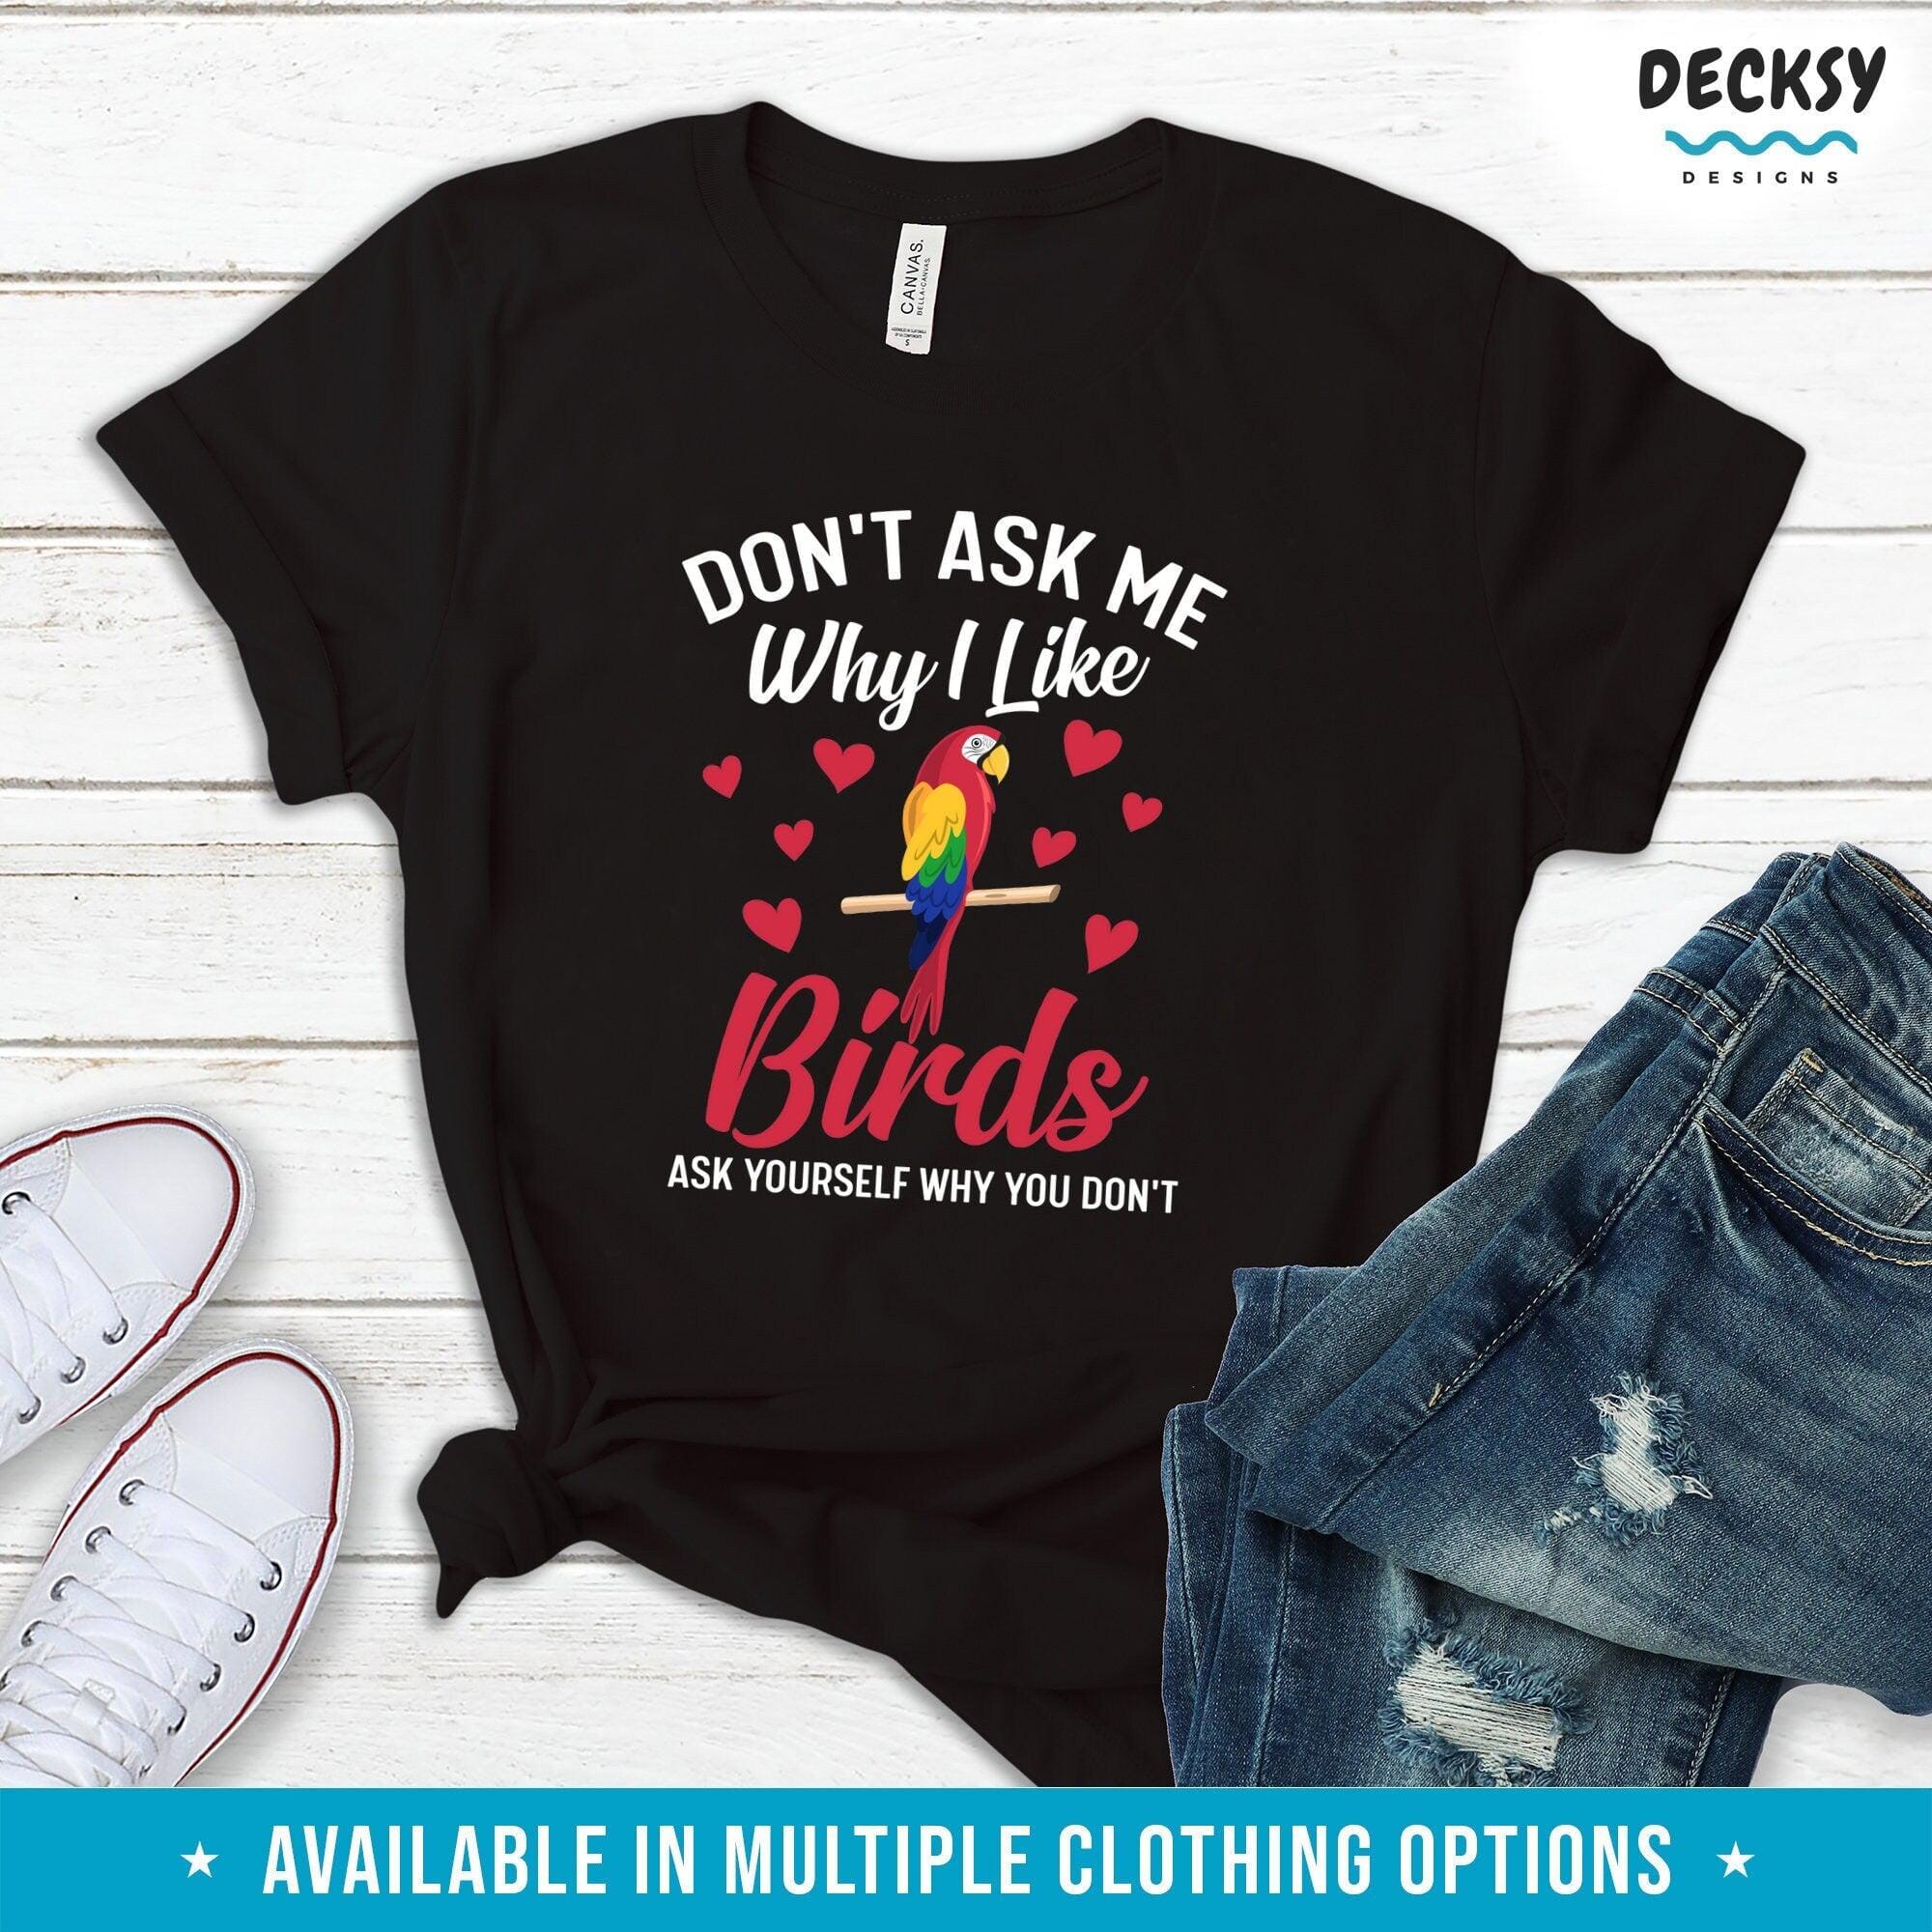 Bird Lover Shirt, Parrot Owner Gift-Clothing:Gender-Neutral Adult Clothing:Tops & Tees:T-shirts:Graphic Tees-DecksyDesigns